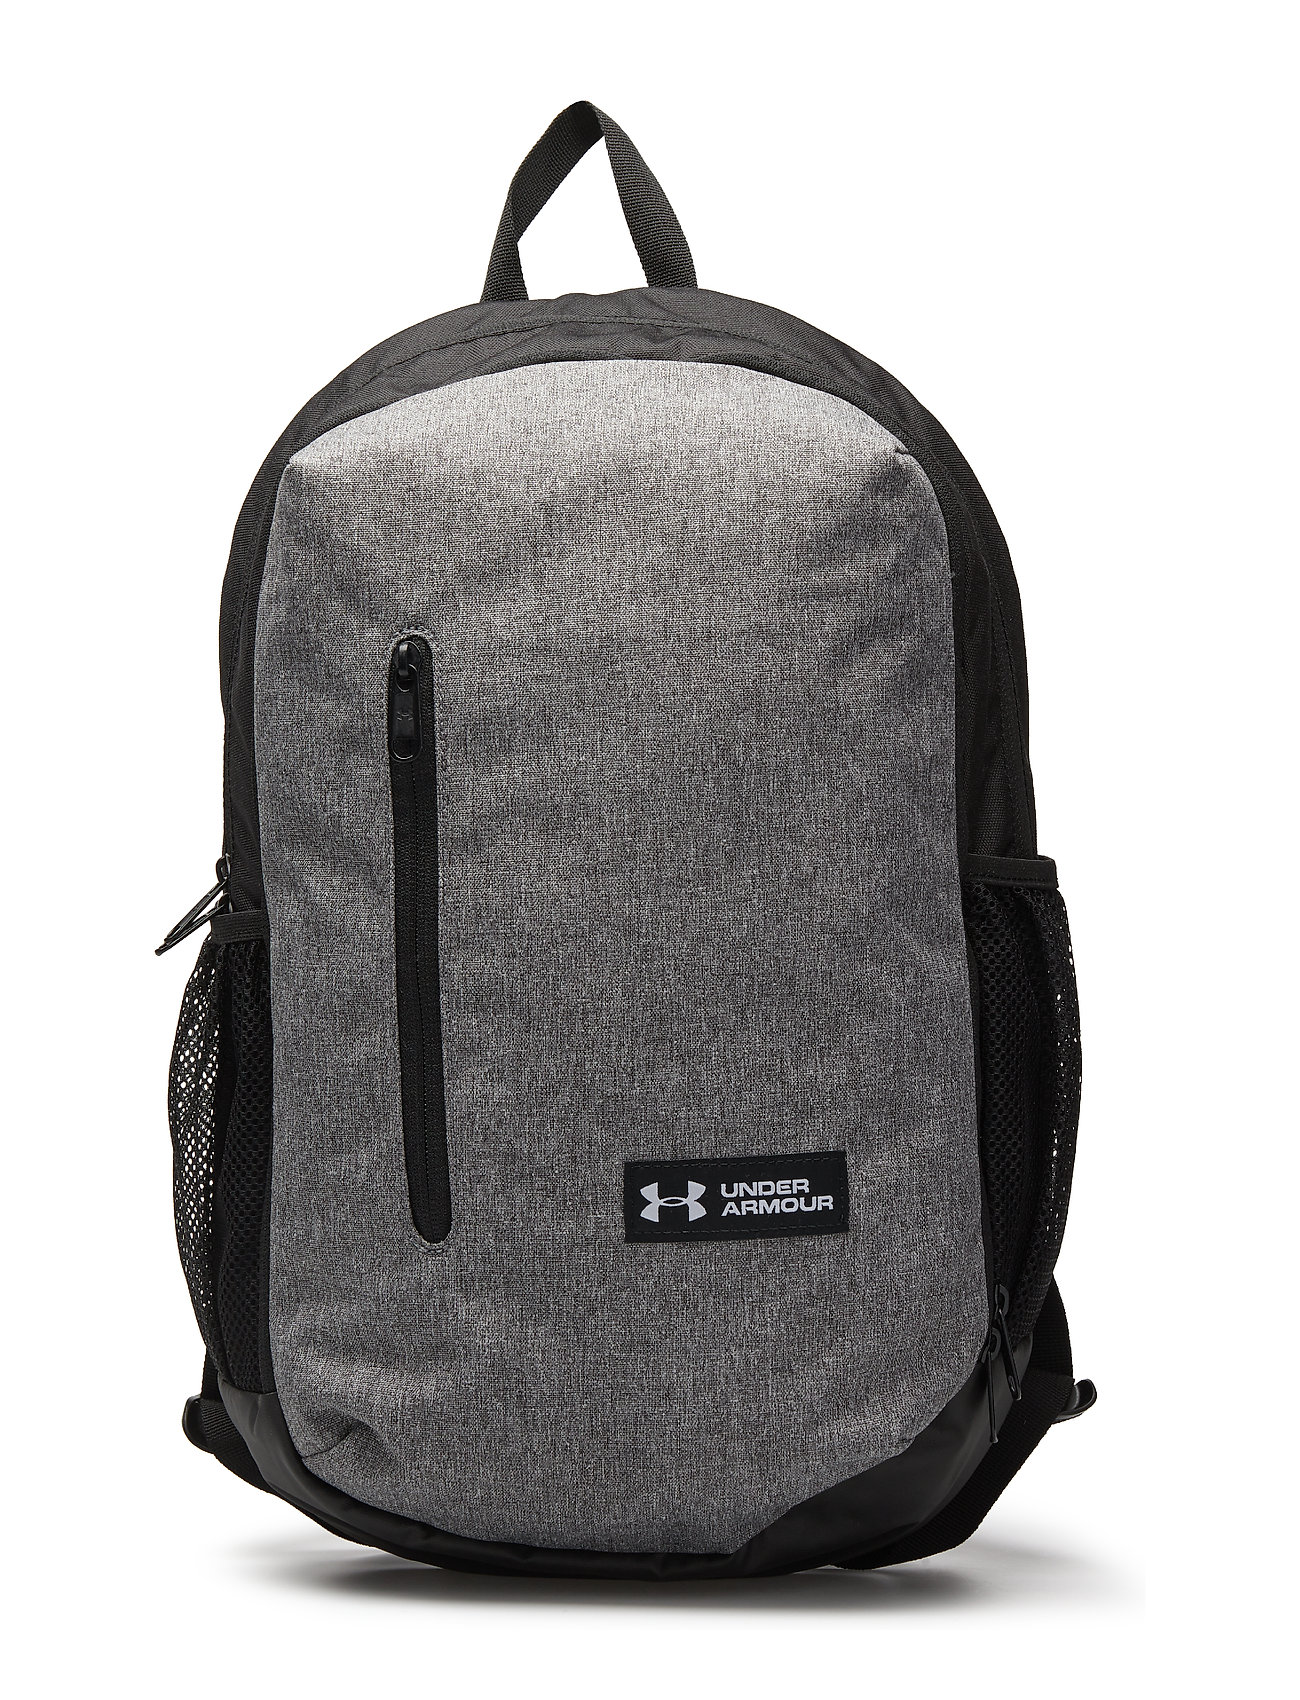 ua roland backpack review